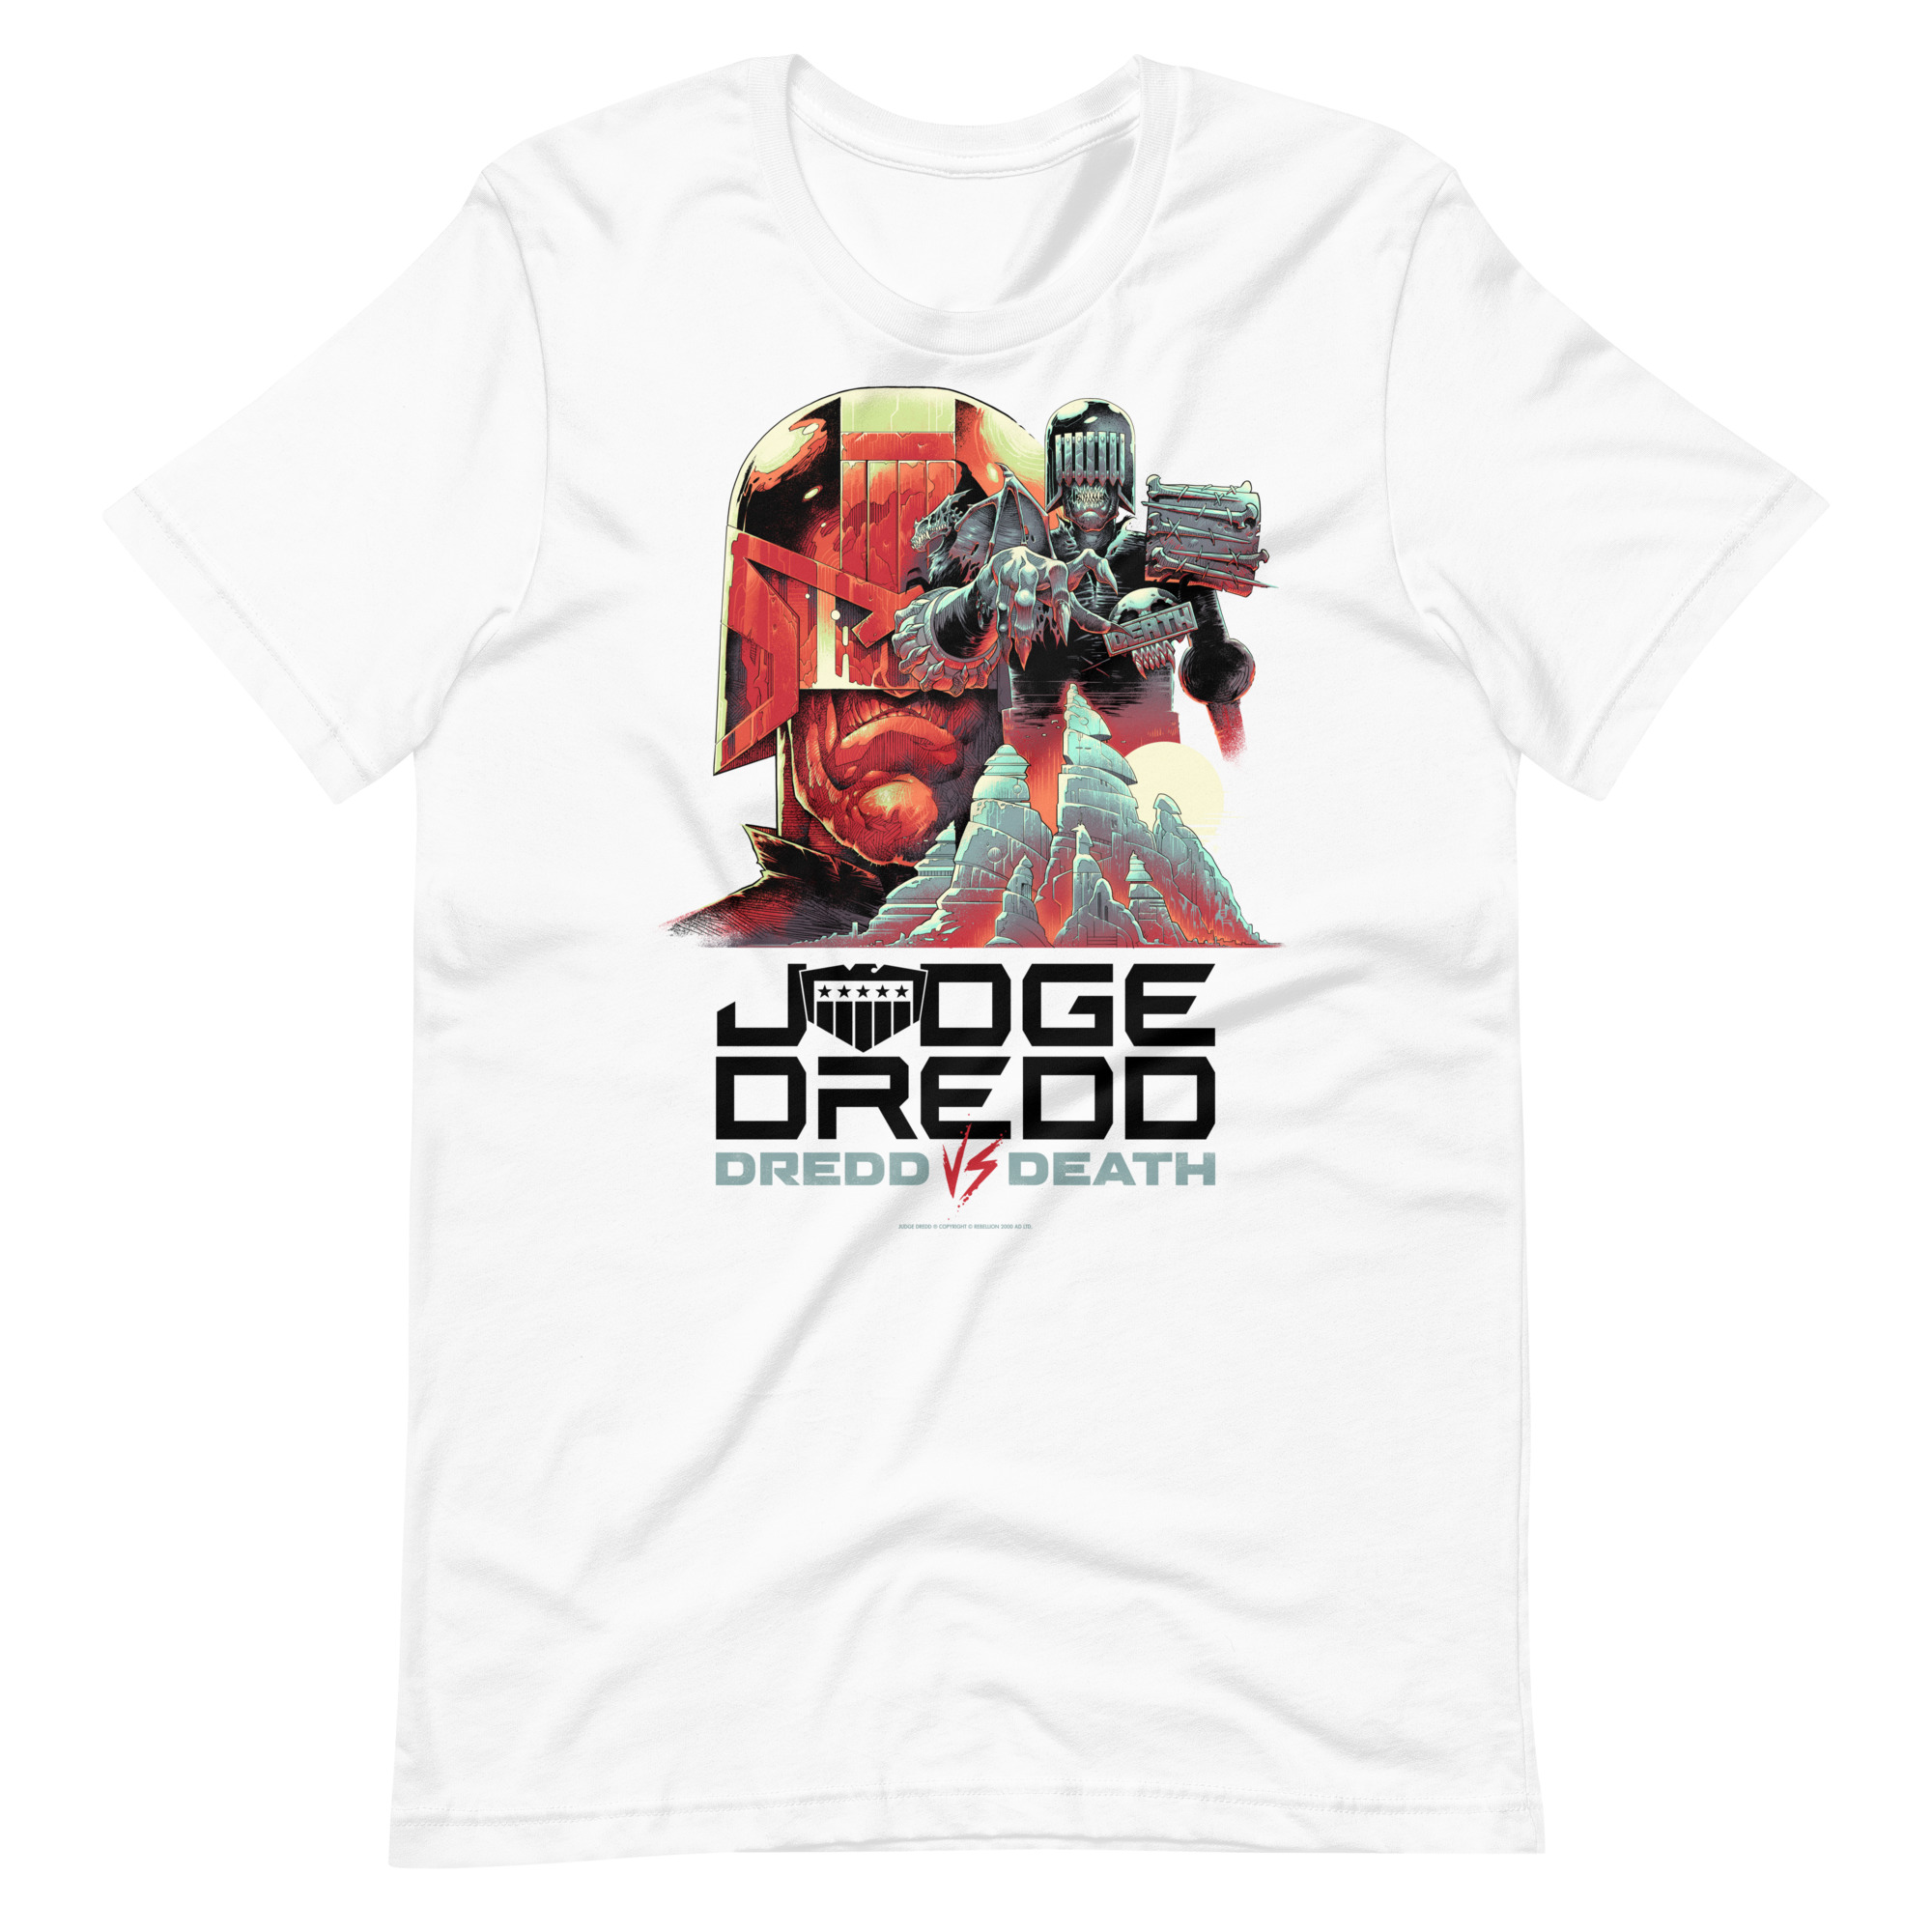 A white Tshirt with a design showing Dredds helmeted face alongside Judge Death who reaches out over mountains. and with the words 'JUDGE DREDD, DREDD VS DEATH' at the bottom